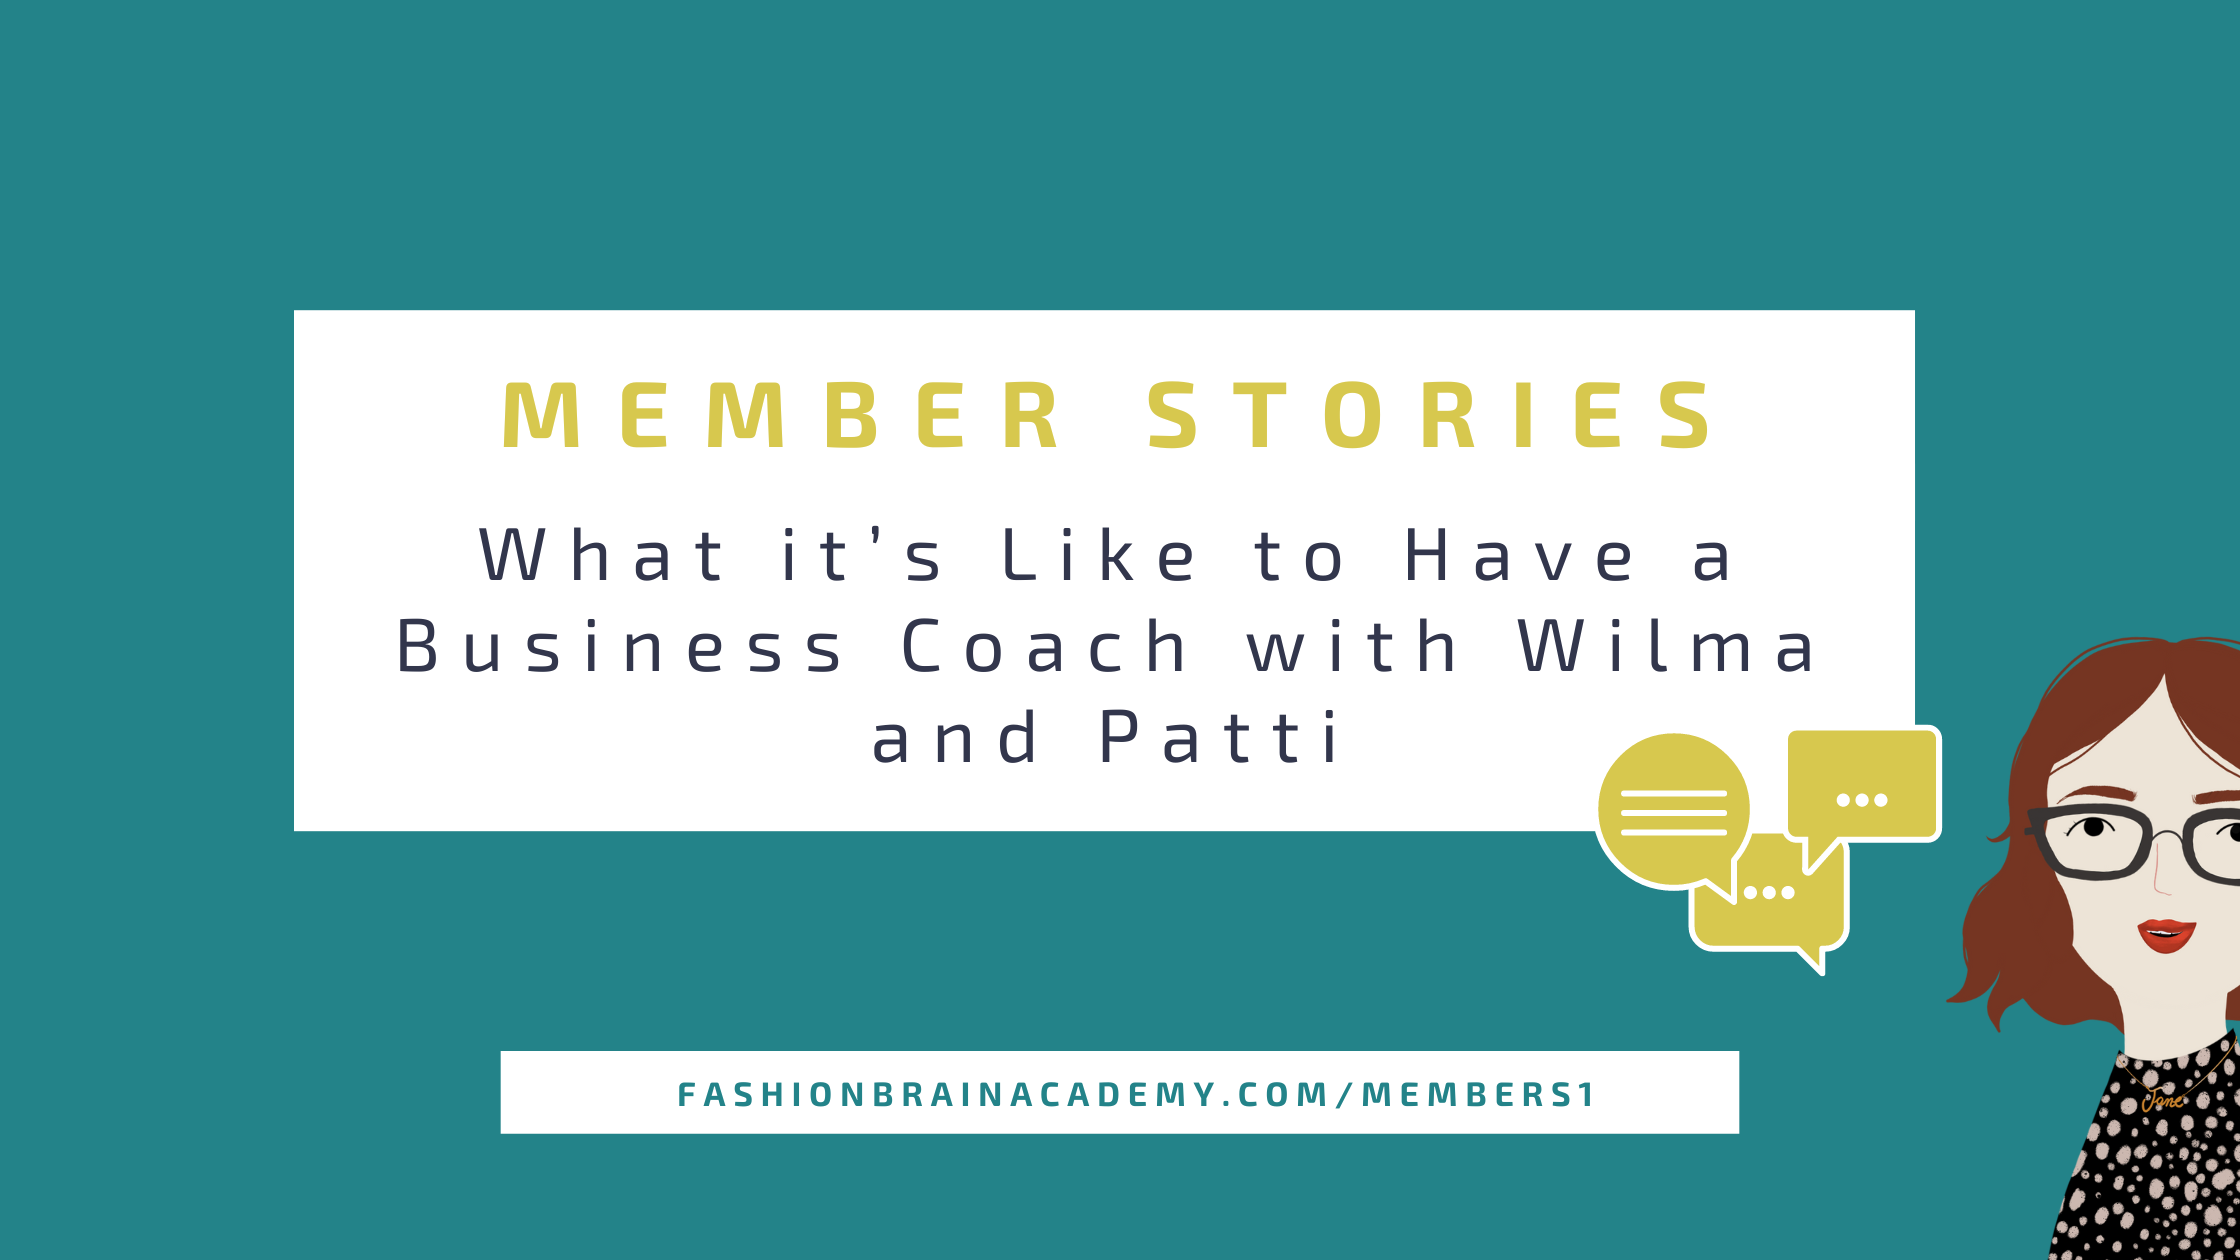 Member Stories - What it’s Like to Have a Business Coach with Wilma and Patti